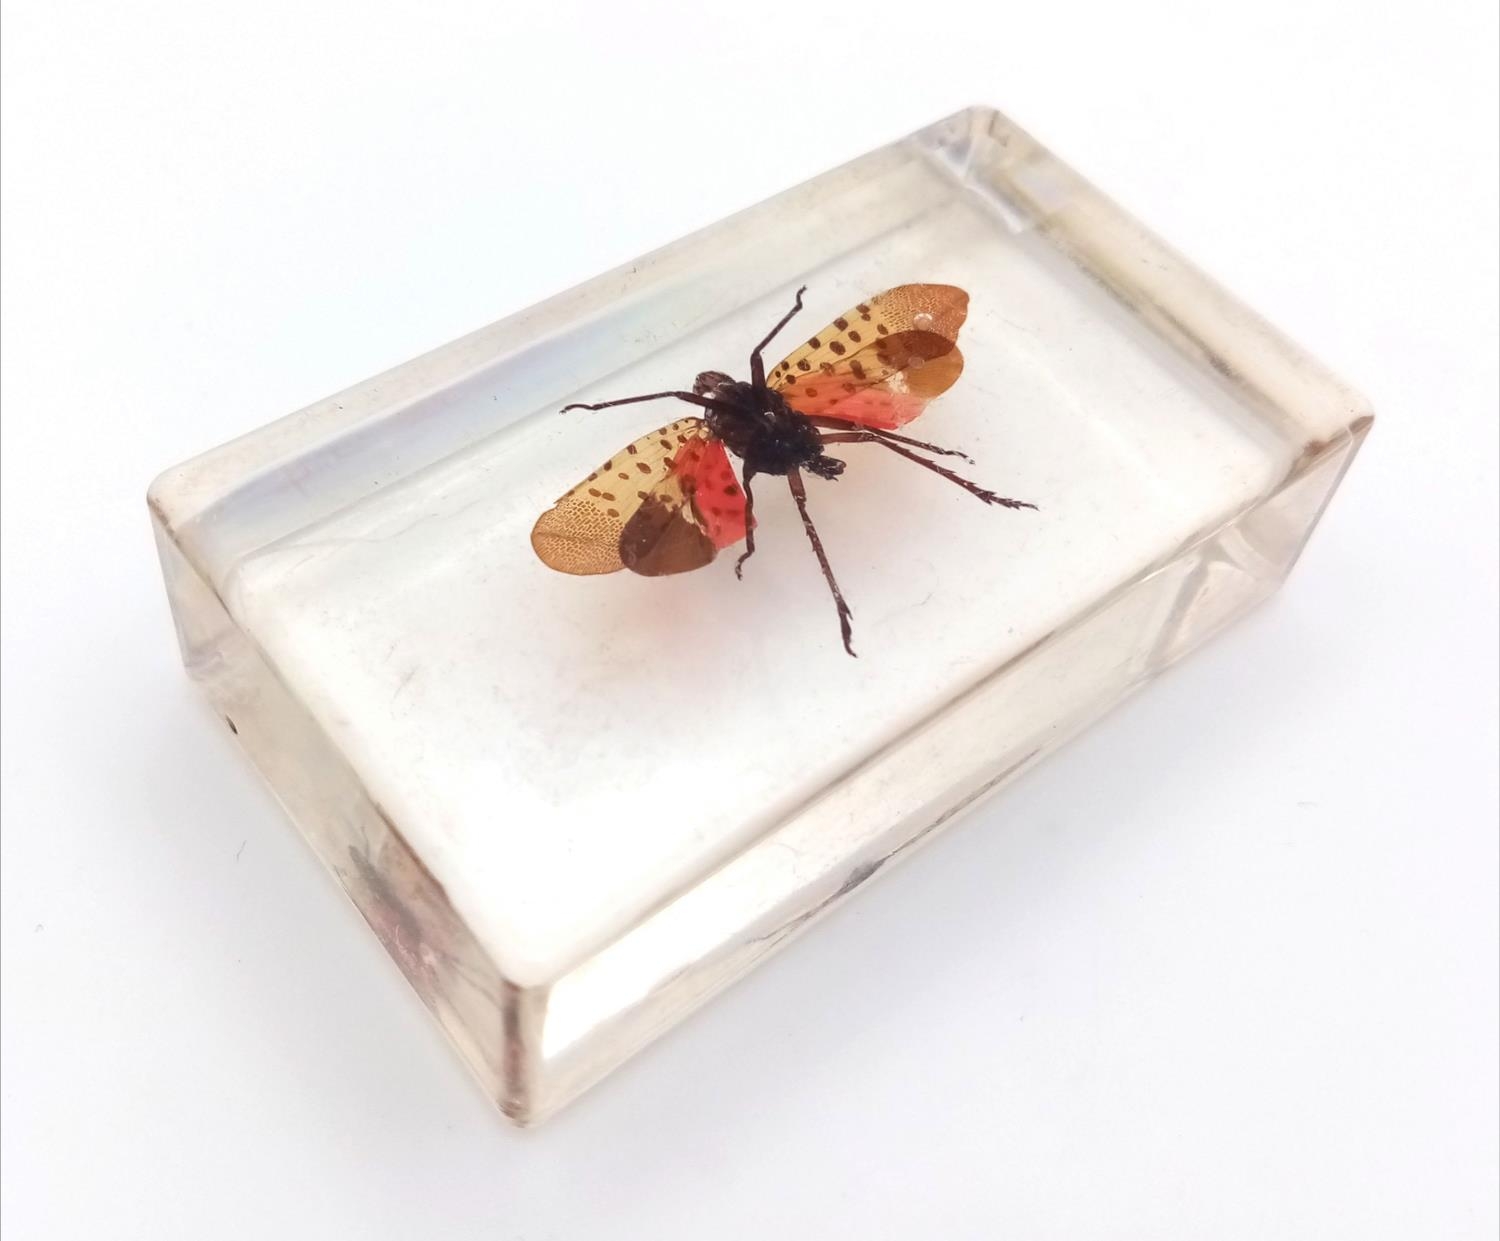 A Spotted Lanternfly in Clear Resin. 7cm x 4cm, 74.21g total weight.